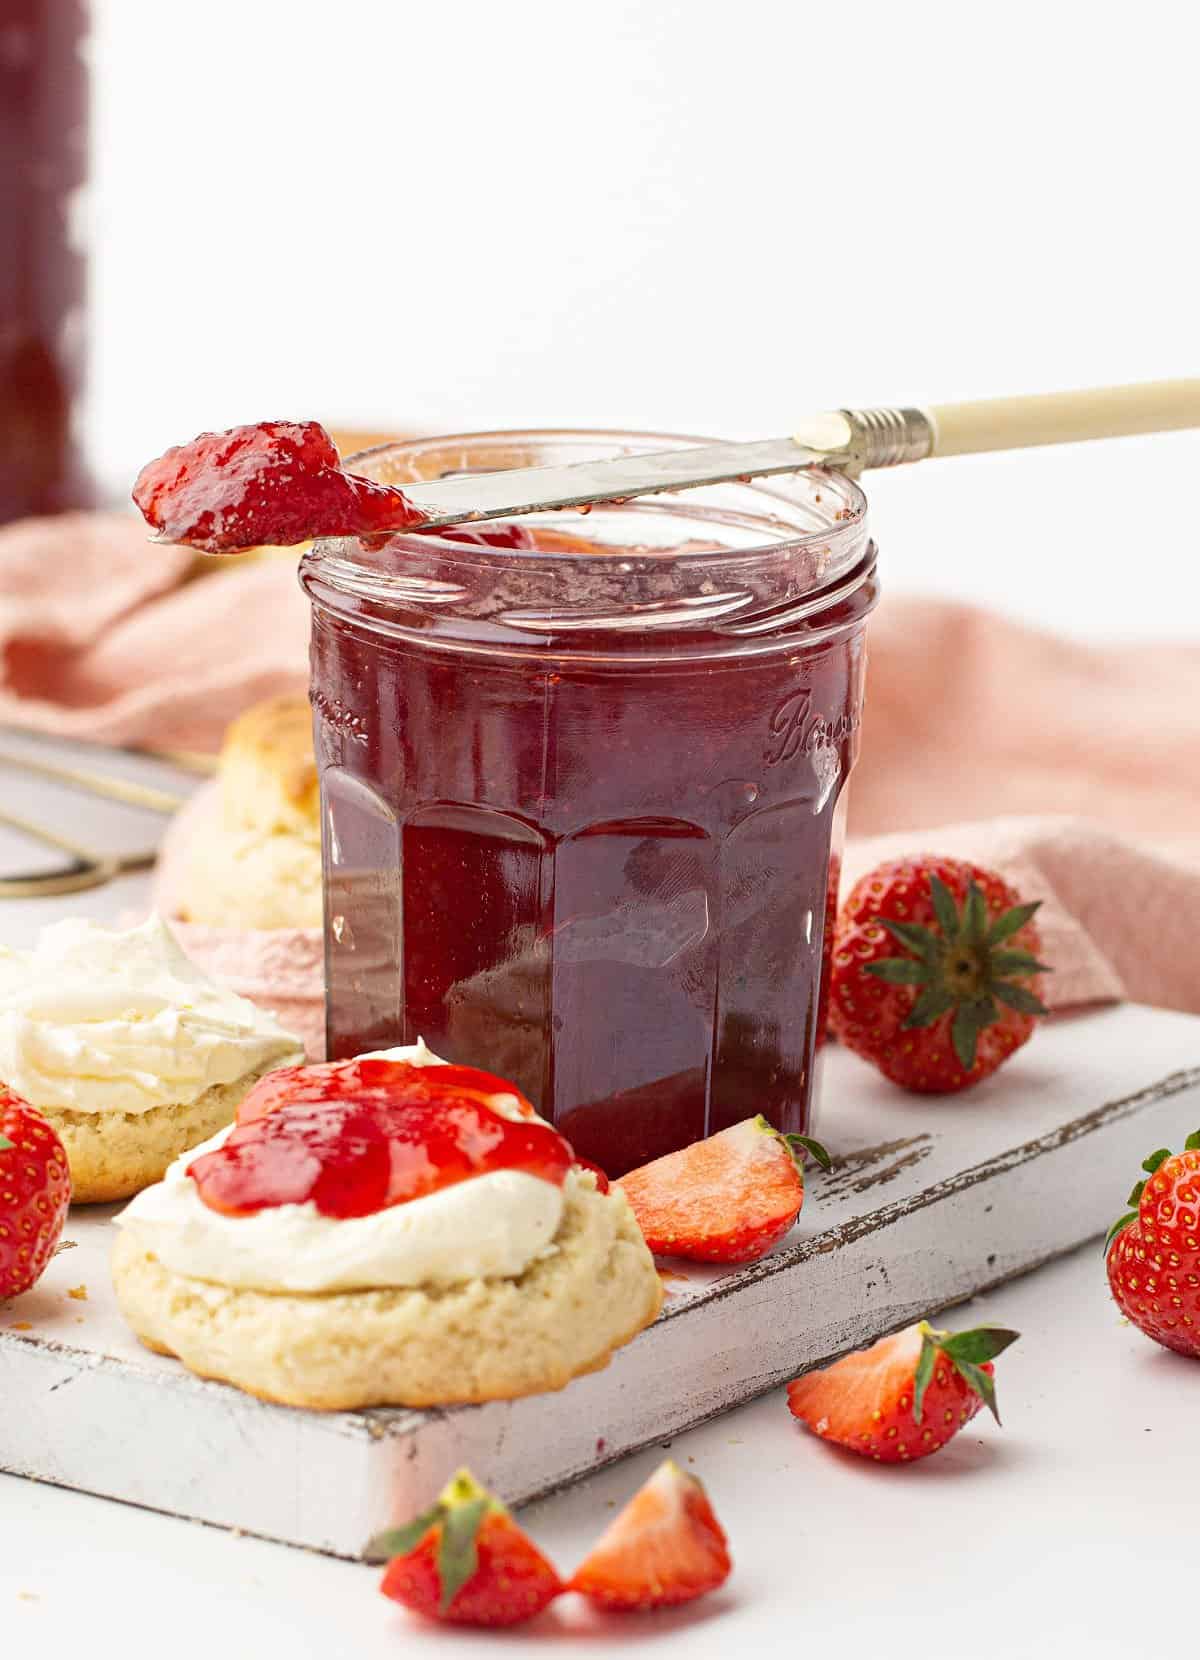 Strawberry jam with biscuits and fresh strawberries.